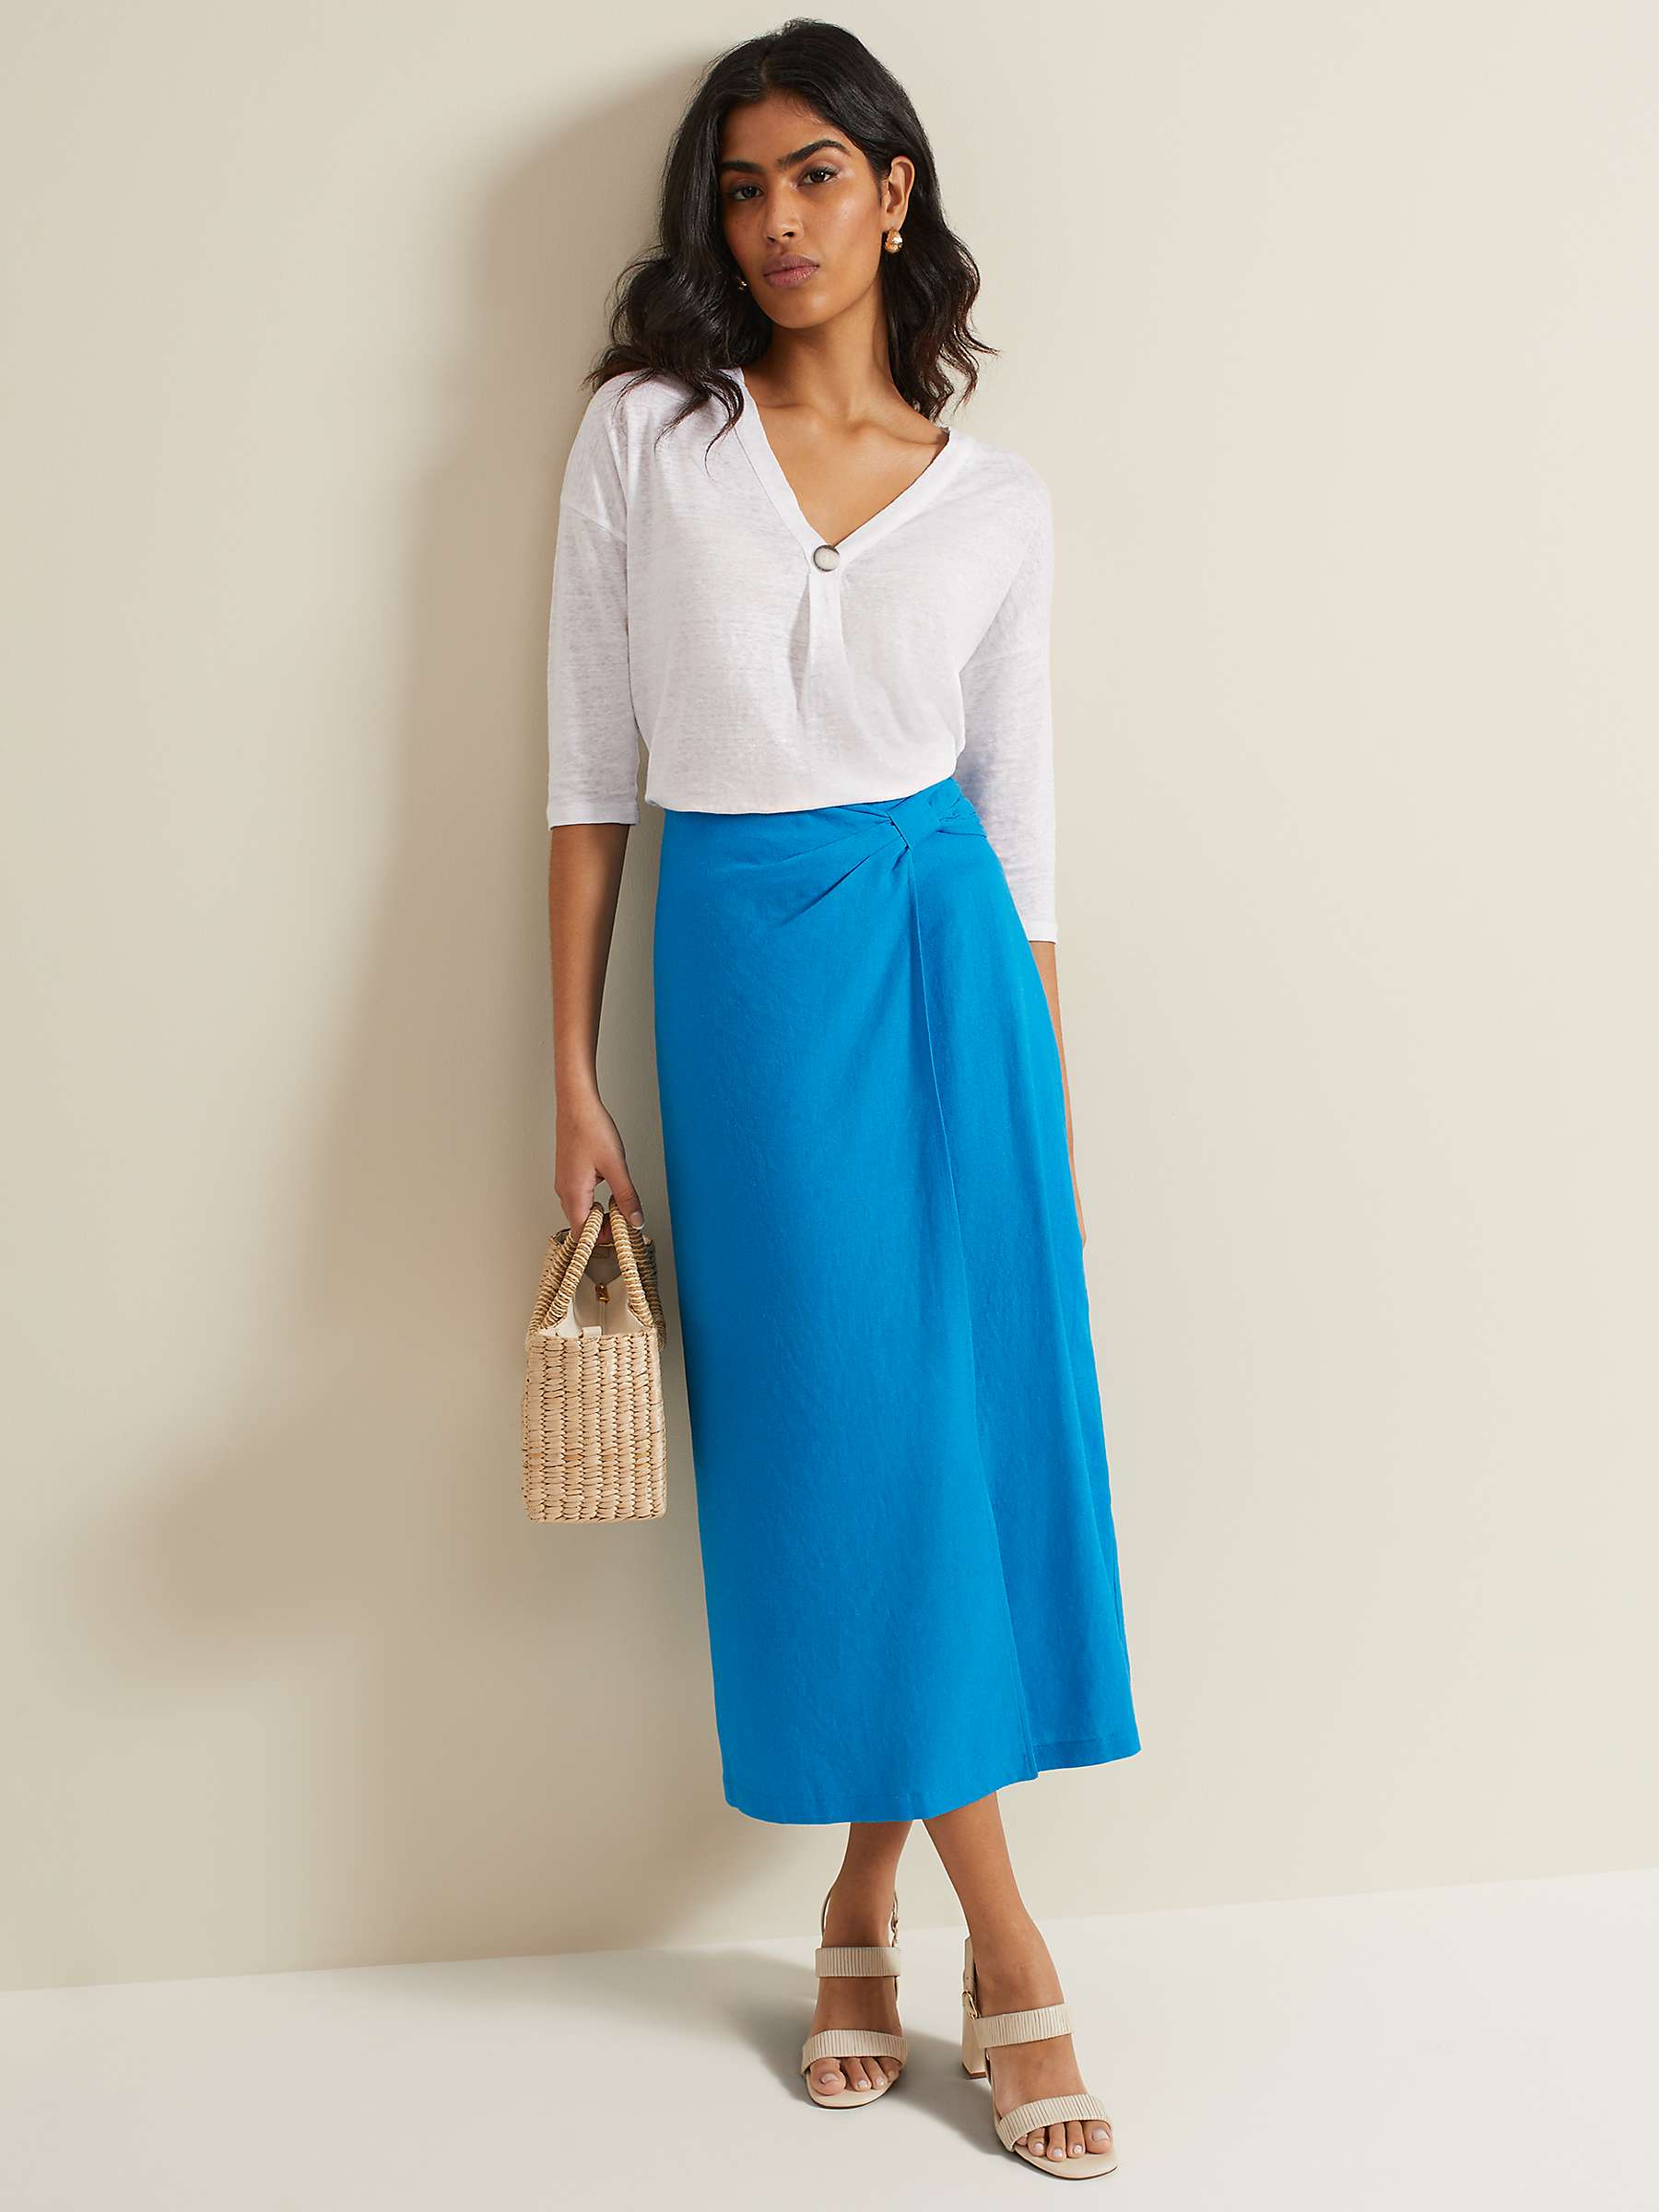 Buy Phase Eight Leah 3/4 Sleeve Linen Top, White Online at johnlewis.com